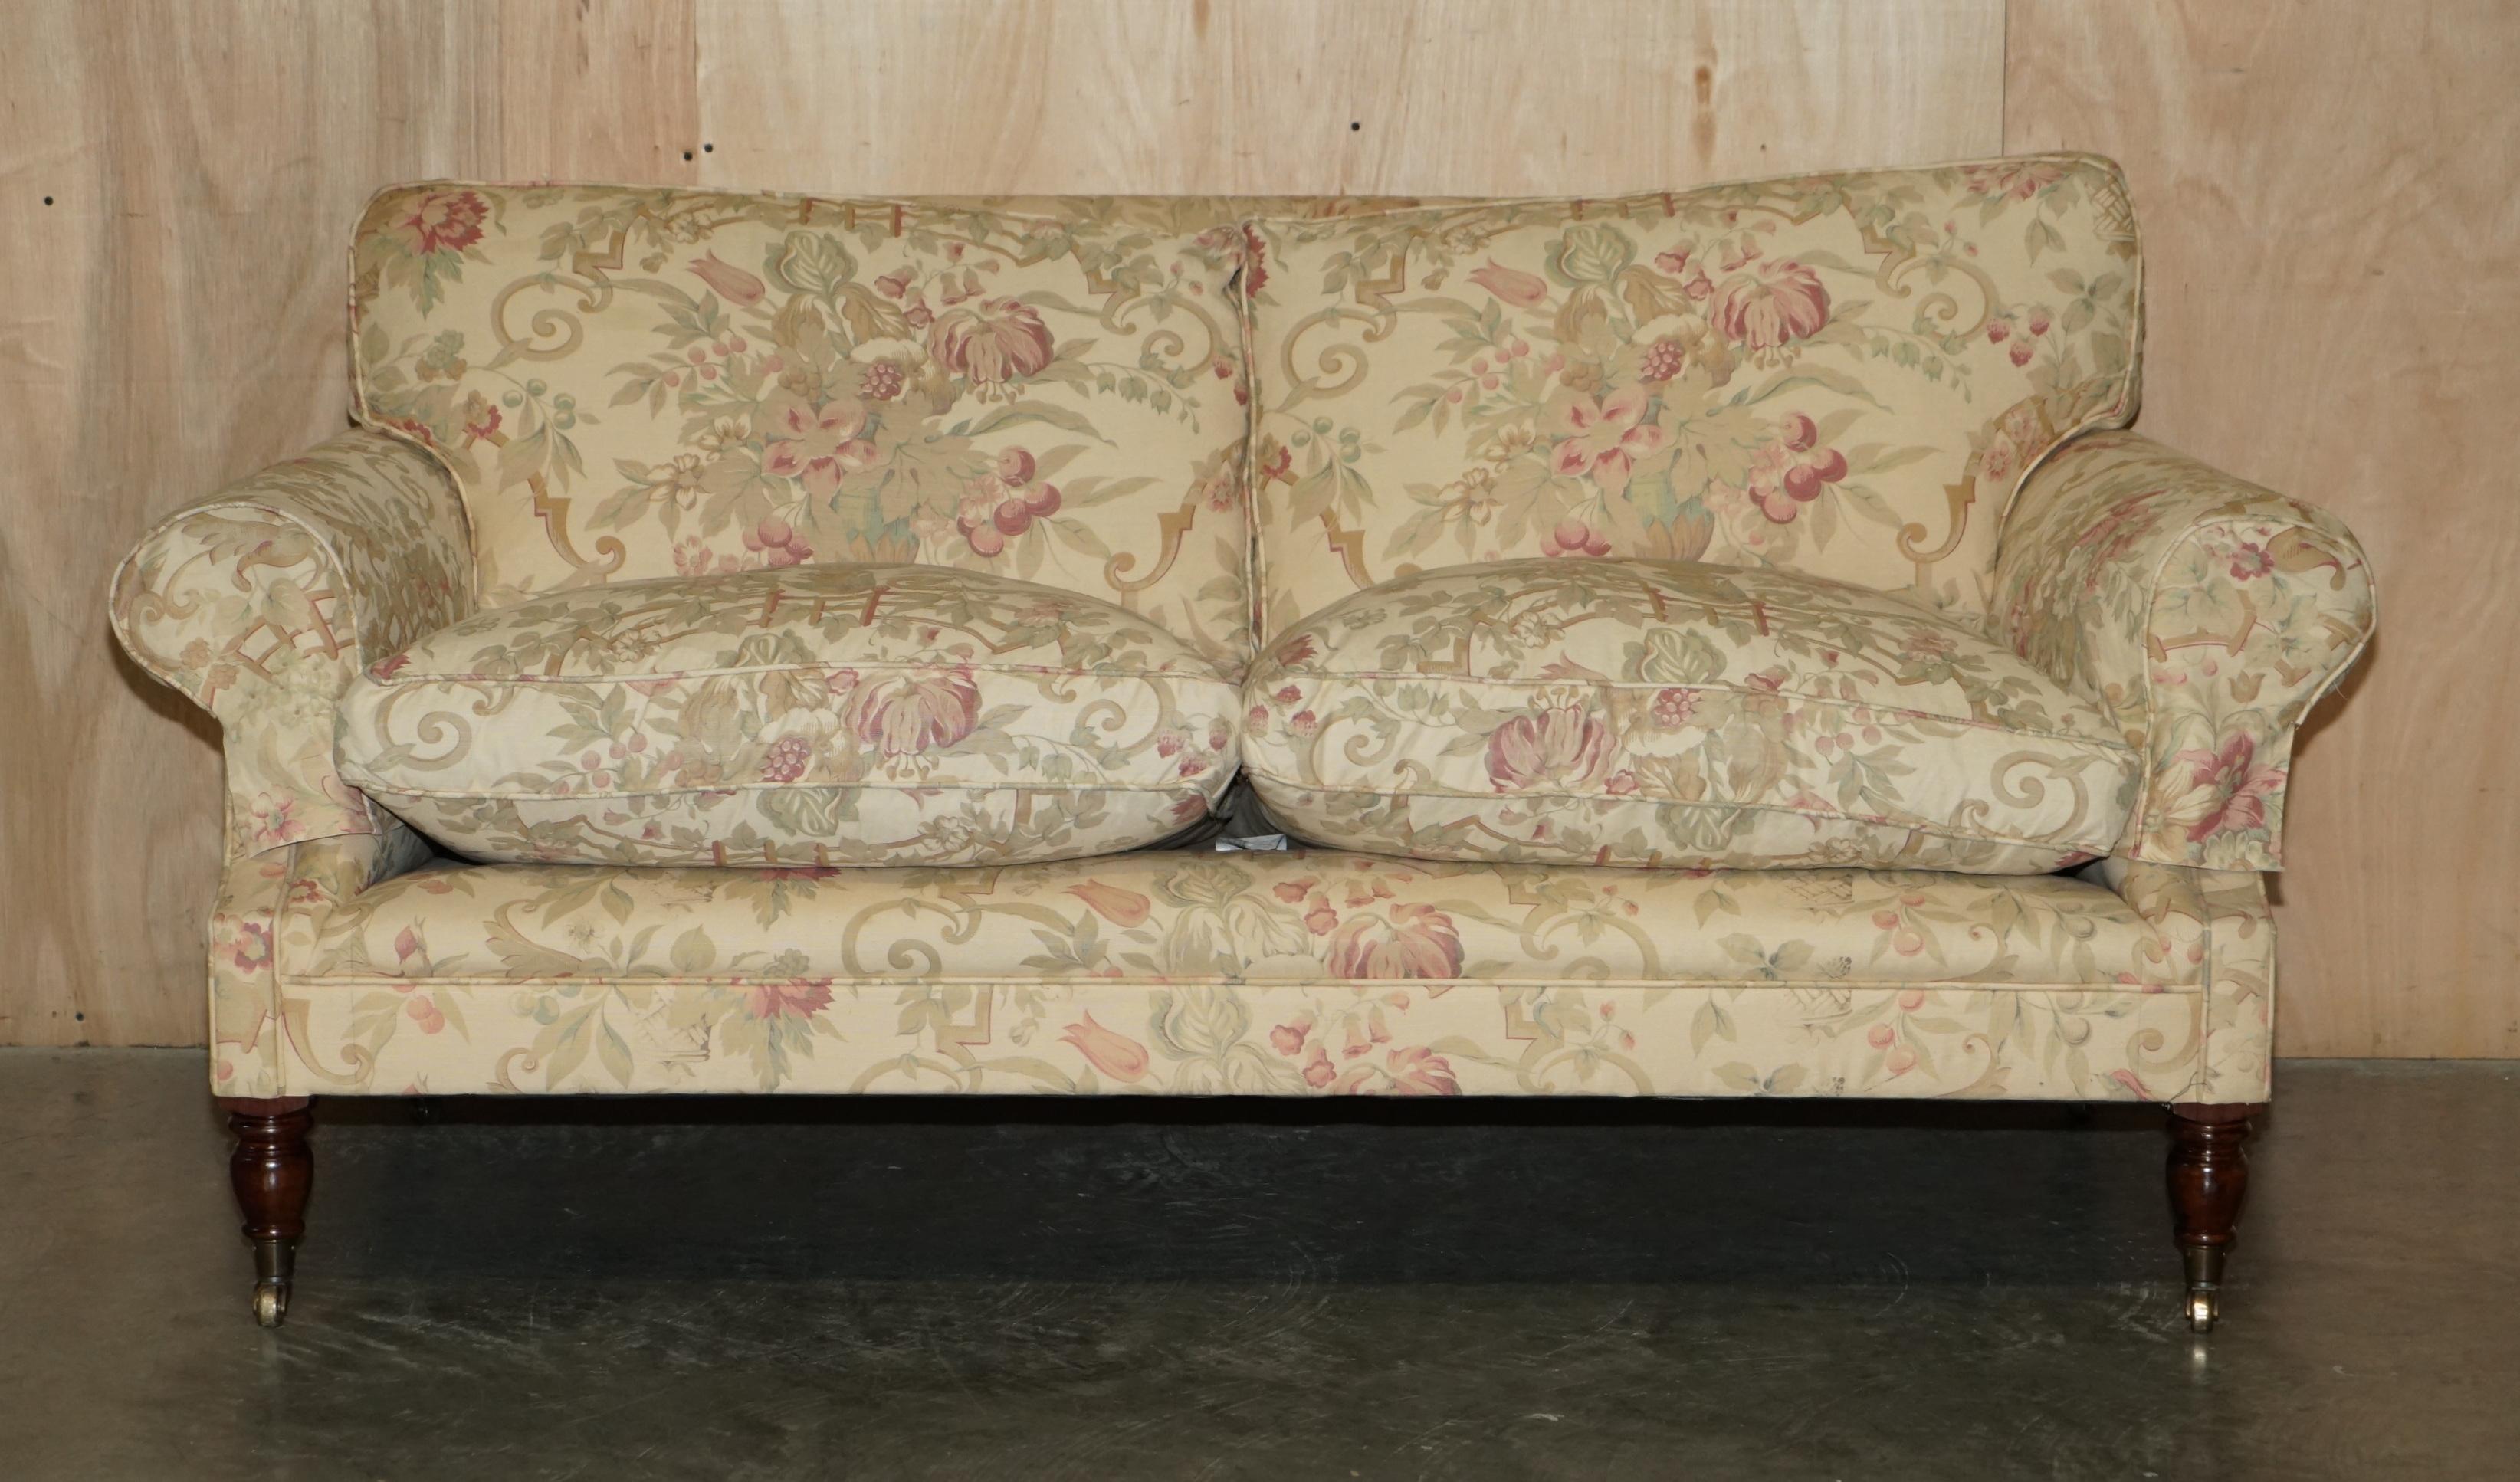 Royal House Antiques

Royal House Antiques is delighted to offer for sale this lovely George Smith Signature Scroll arm sofa which is one of a pair in floral upholstery with feather filled cushions 

Please note the delivery fee listed is just a